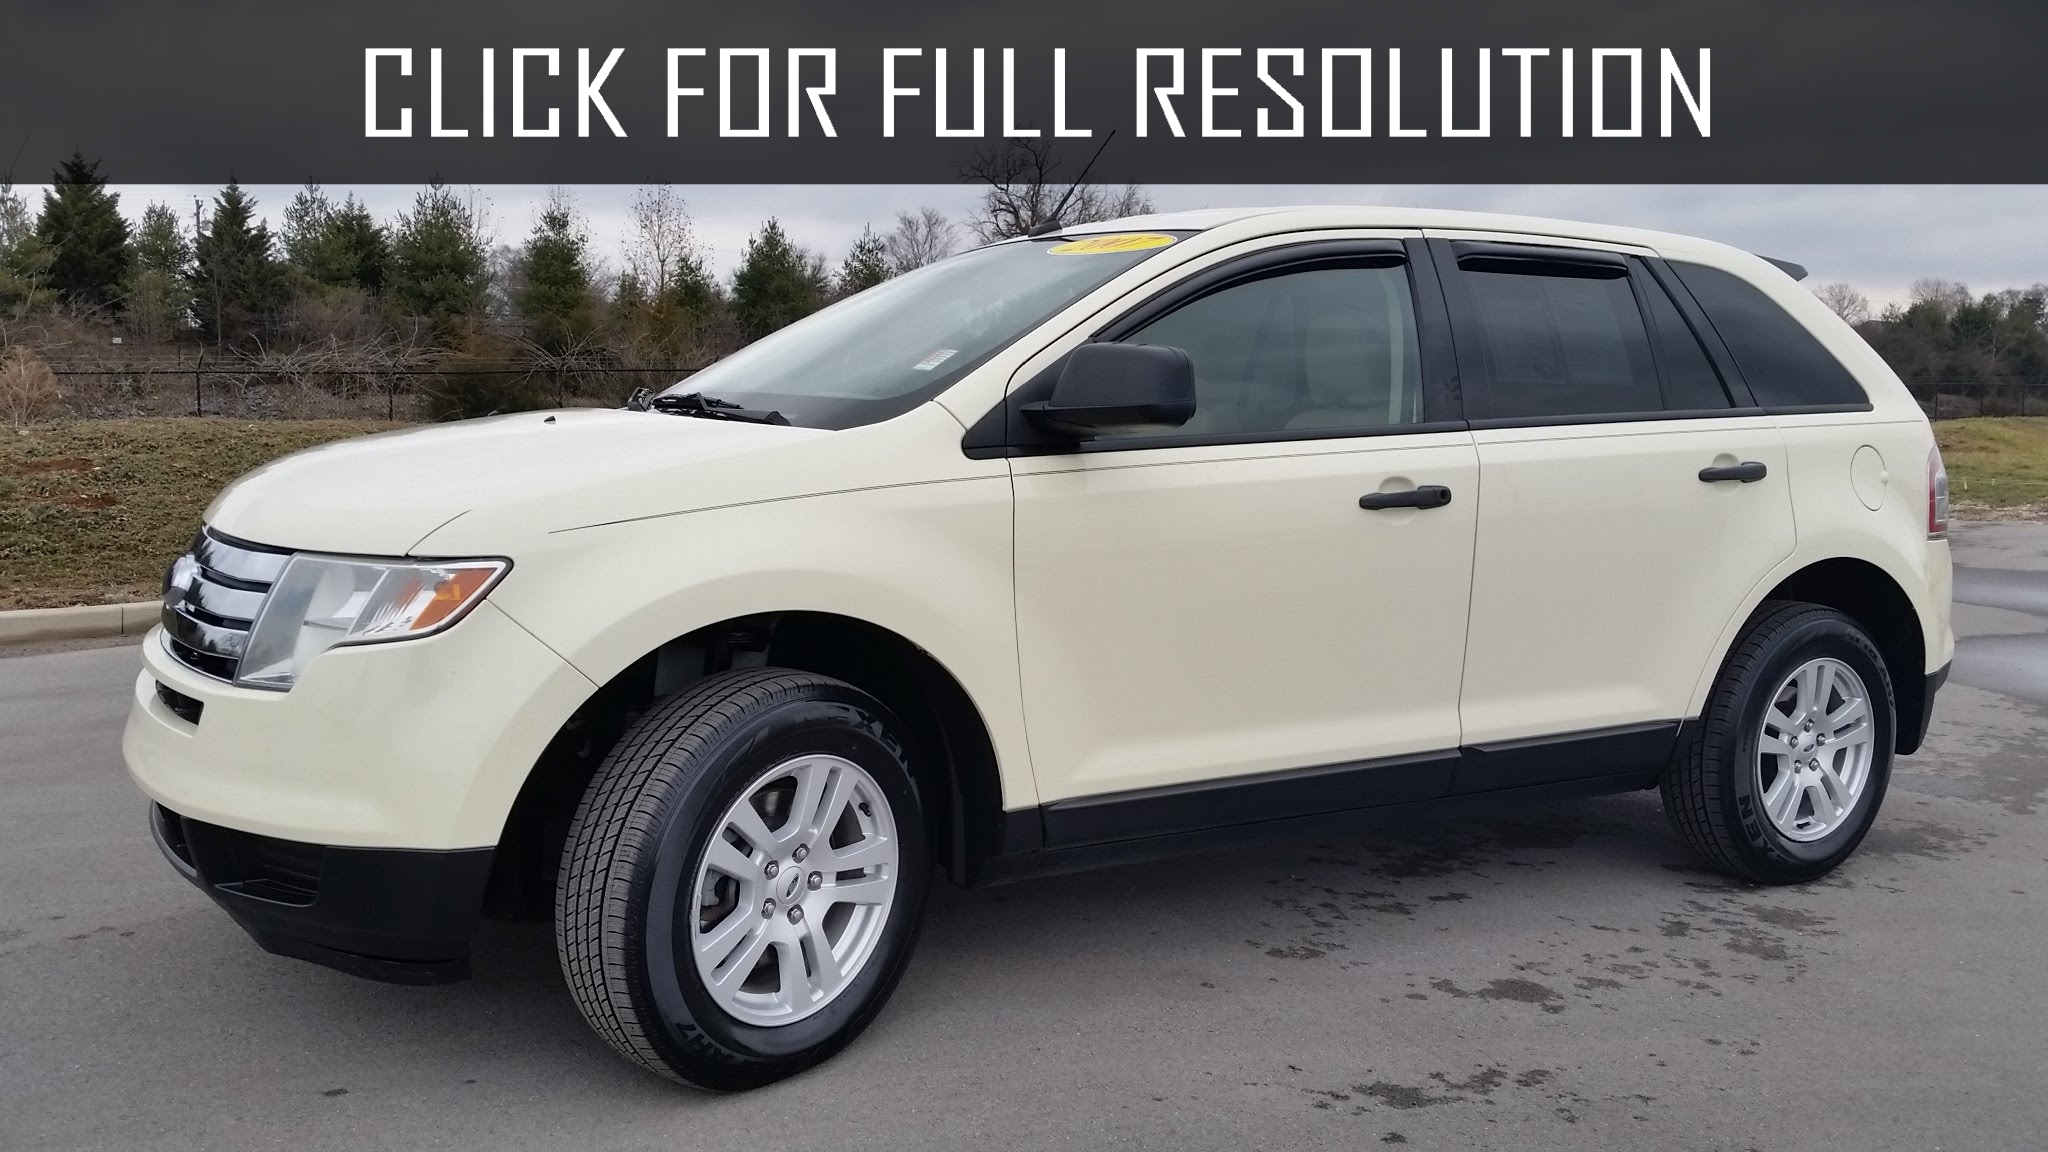 2007 Ford Edge Sel Best Image Gallery 14 15 Share And Download